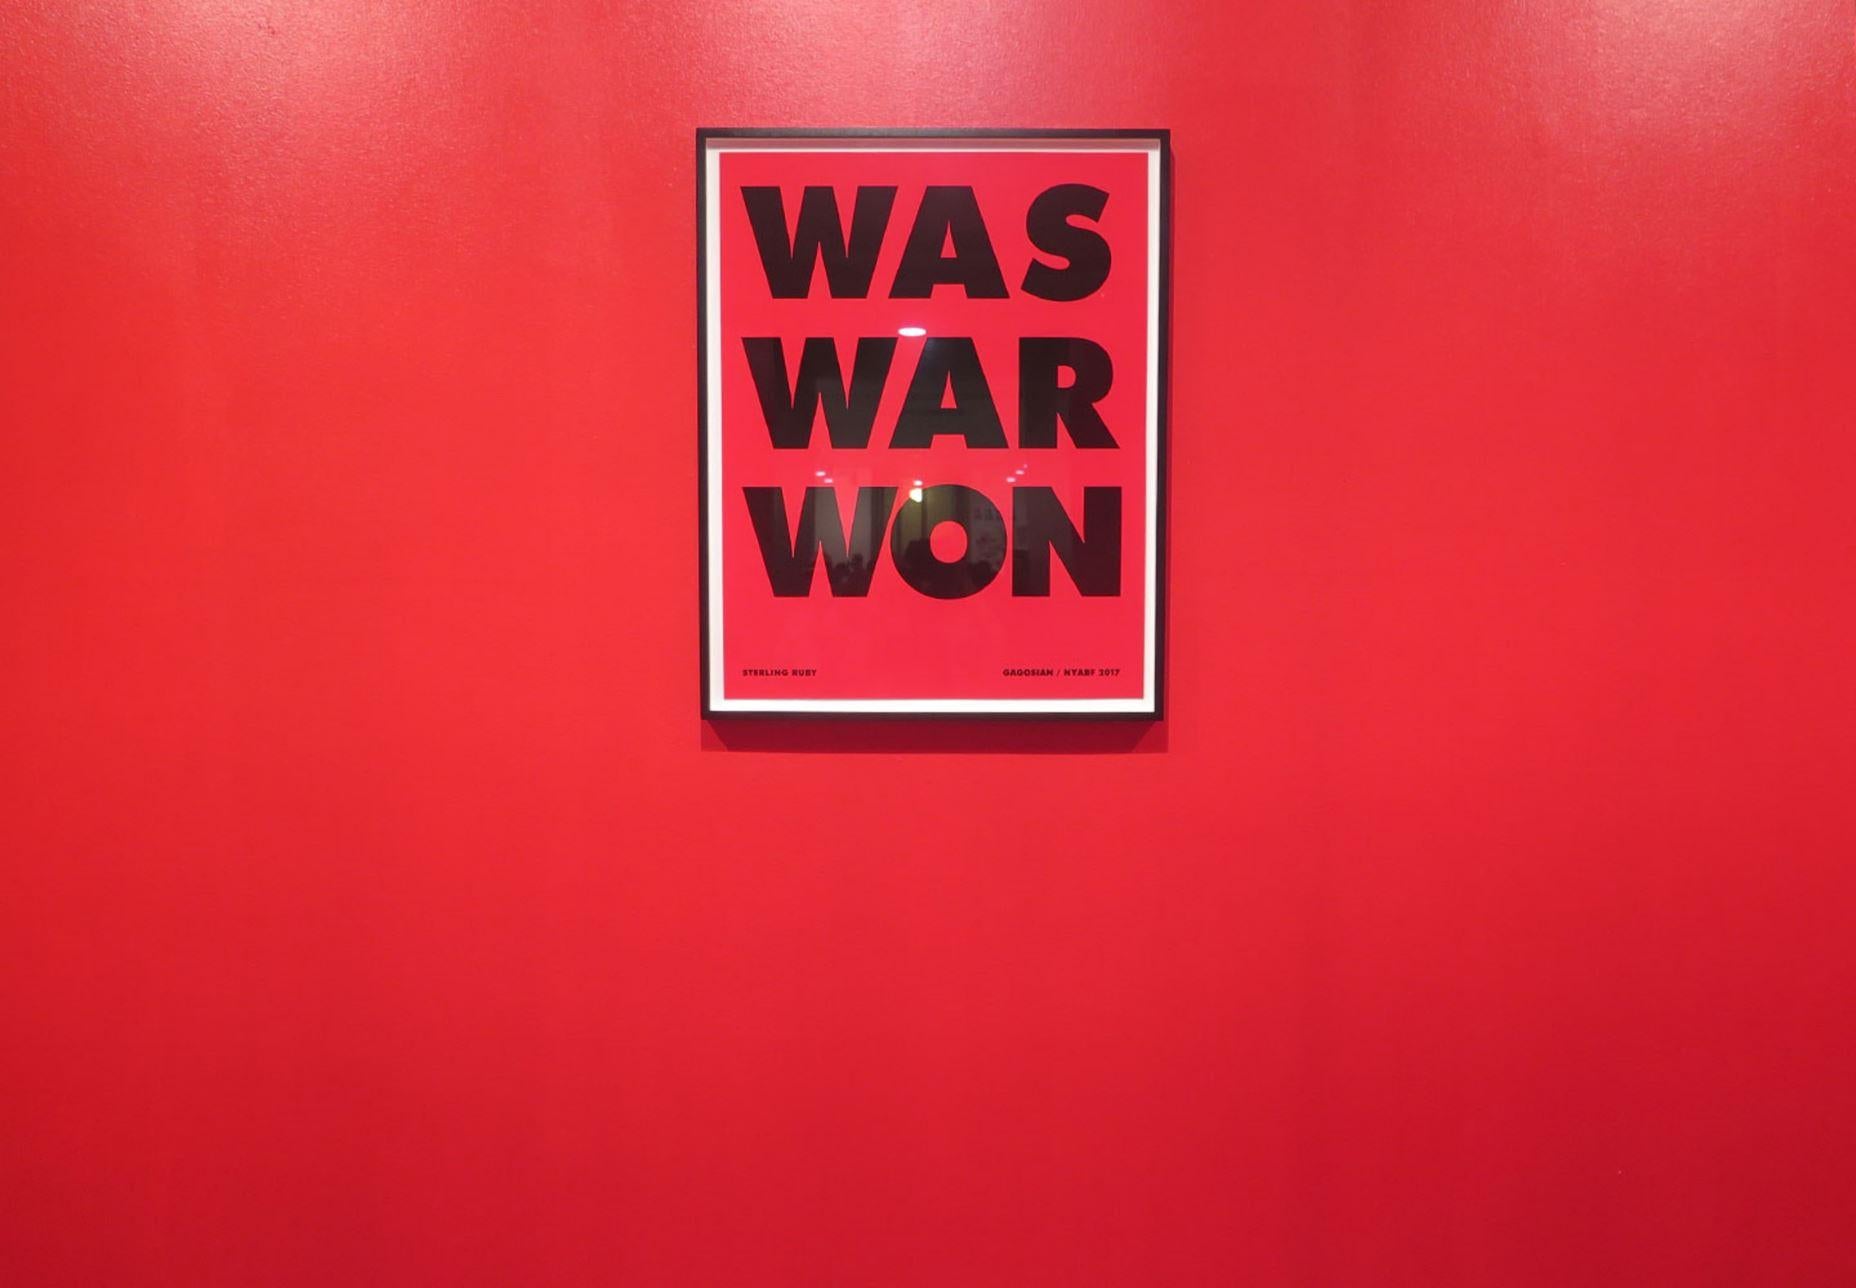 WAS WAR WON  poster - Print by Sterling Ruby